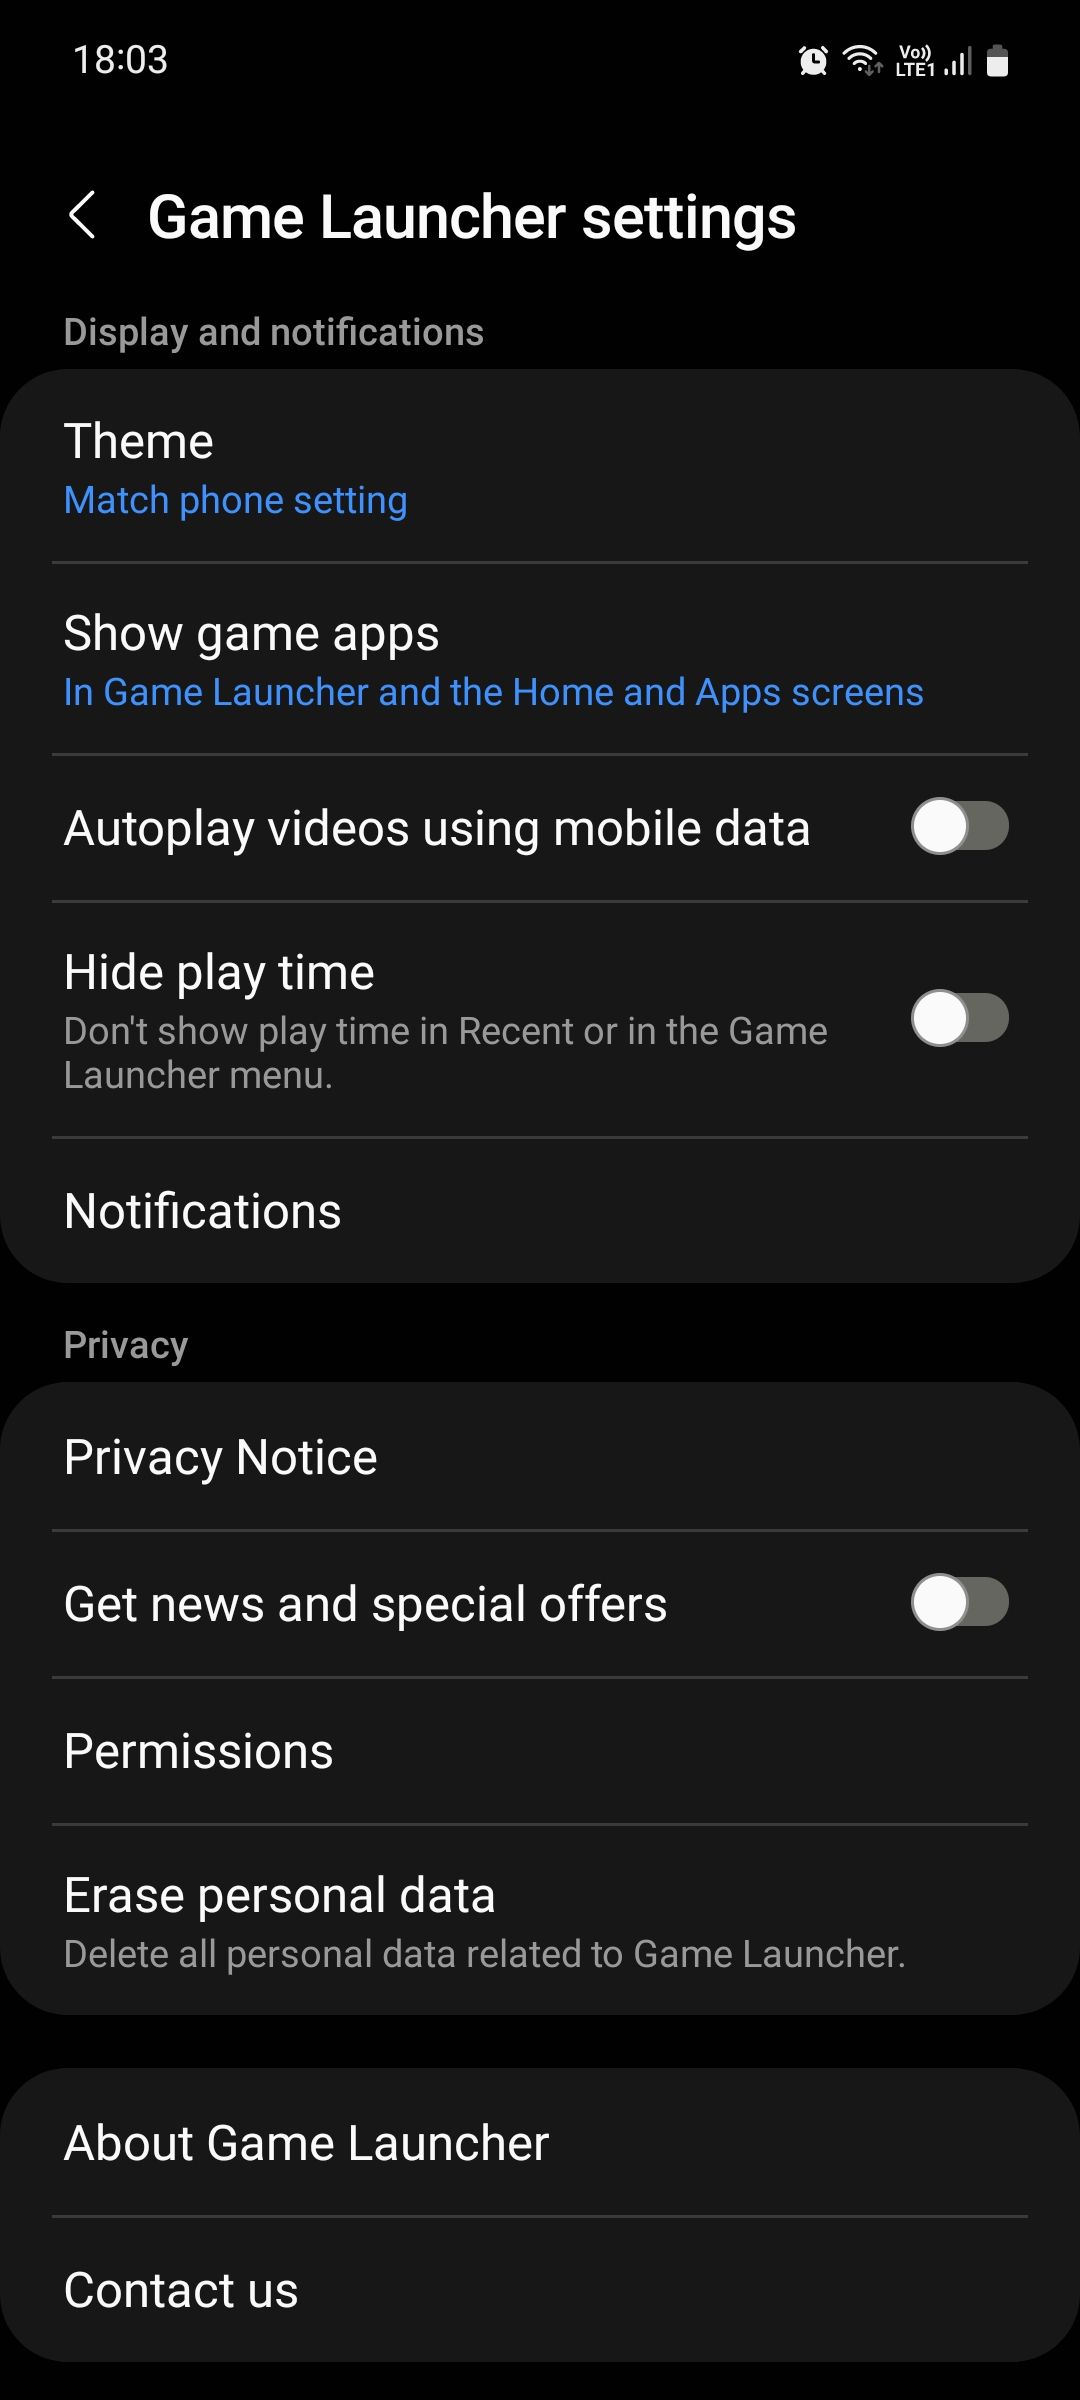 Samsung Game Launcher settings